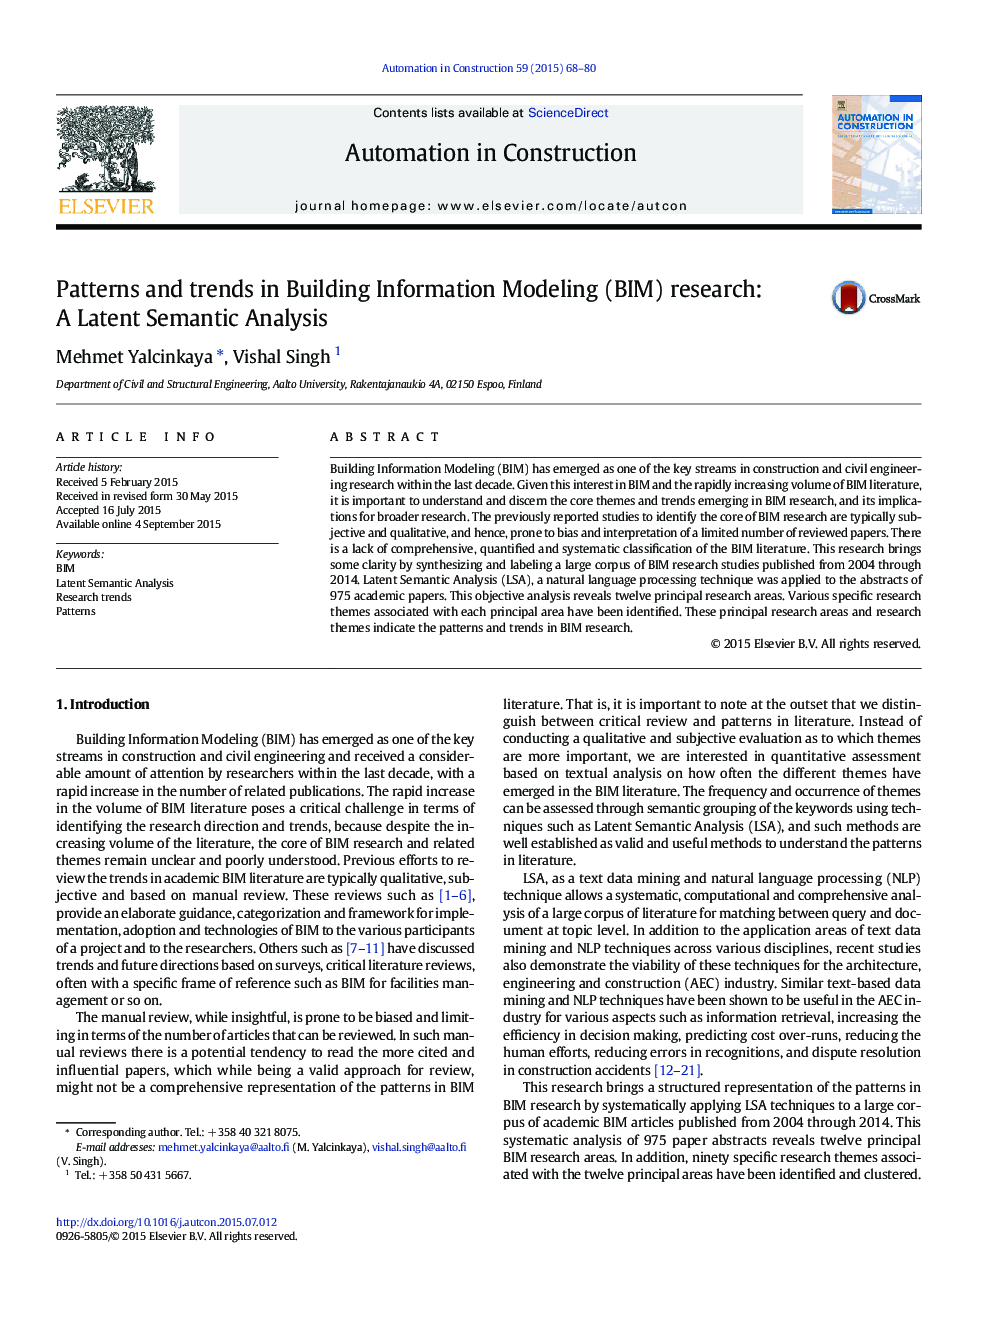 Patterns and trends in Building Information Modeling (BIM) research: A Latent Semantic Analysis